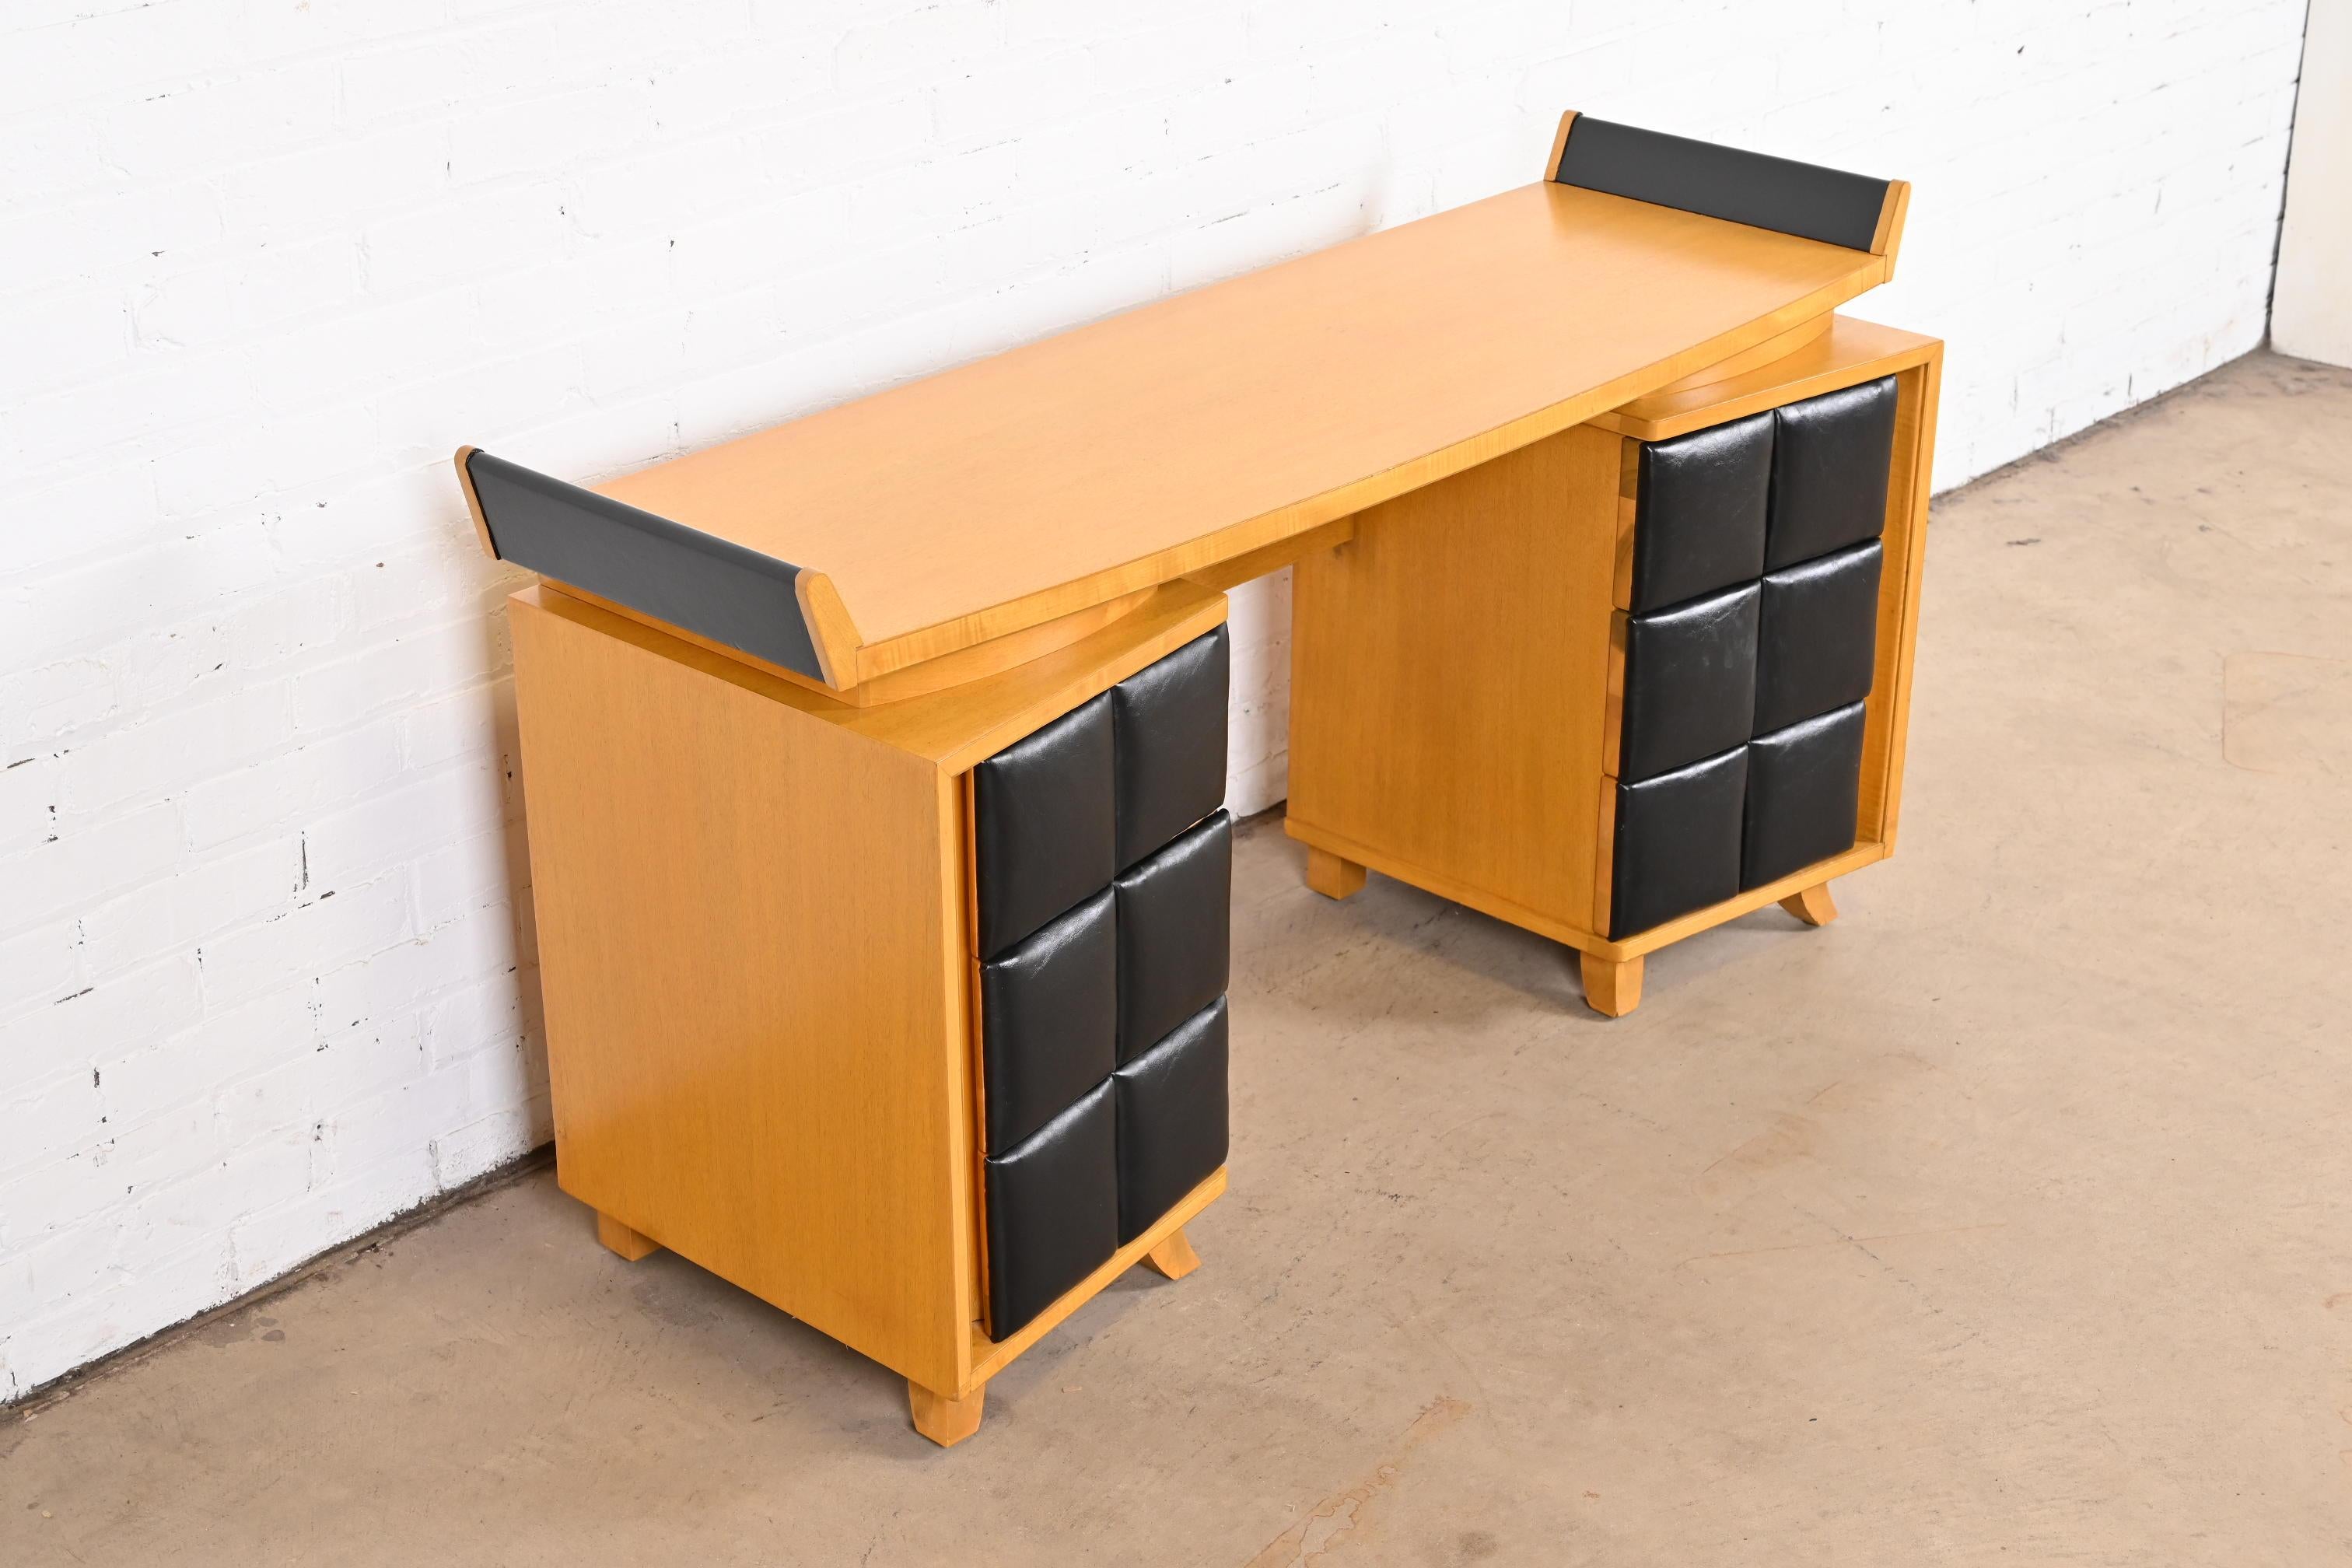 Faux Leather Gilbert Rohde for Herman Miller Art Deco Vanity or Desk, 1930s For Sale